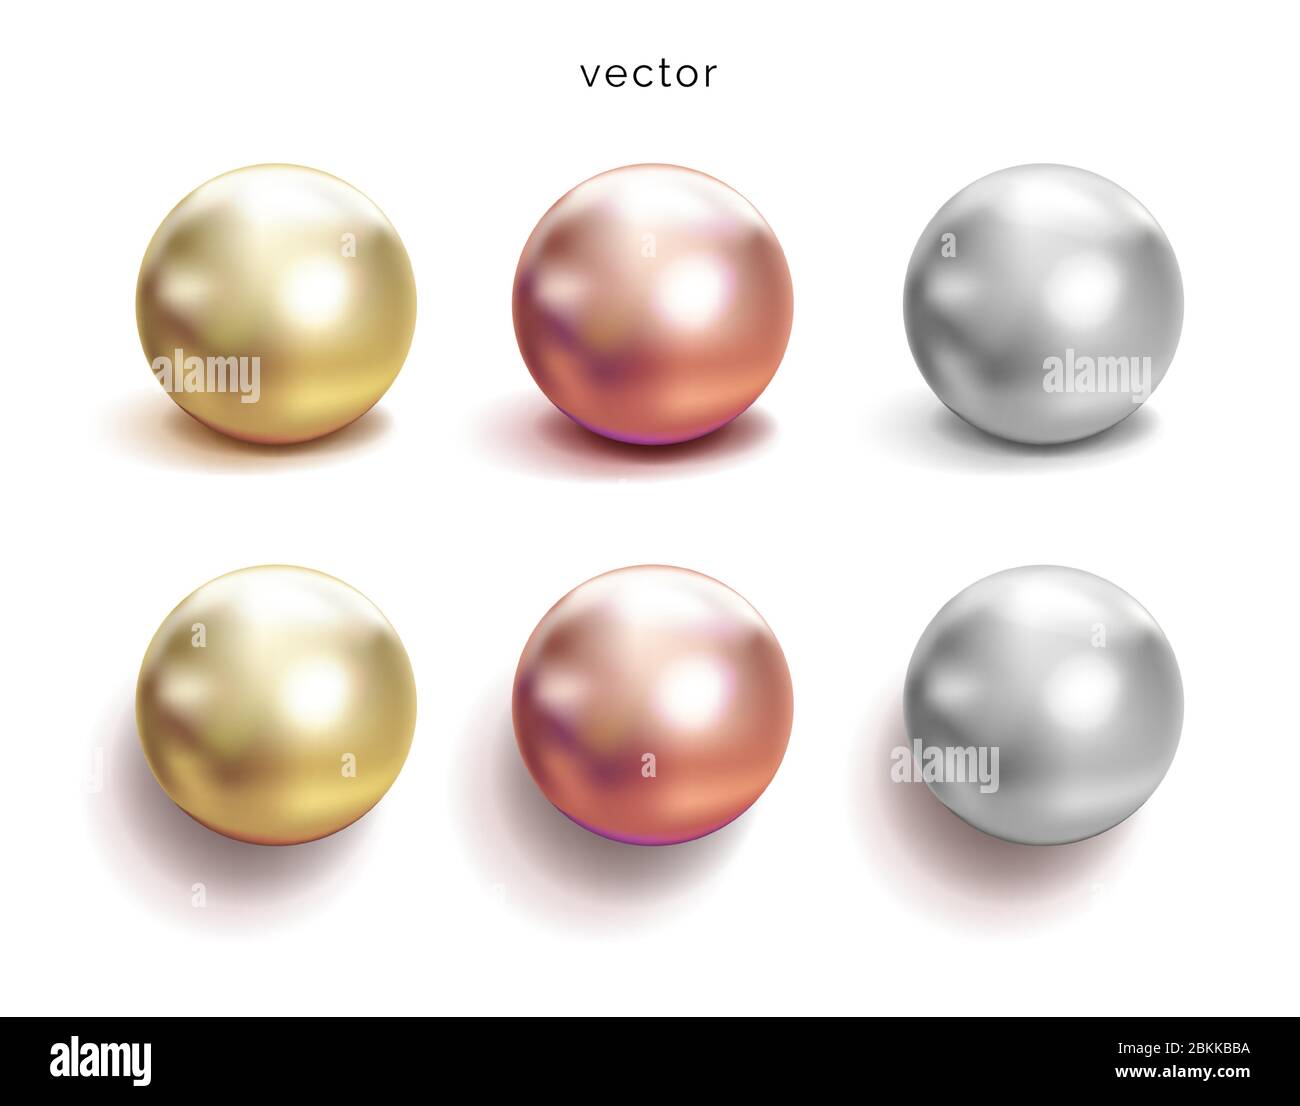 Set of pearl silver, pink or rose gold and gold spheres with glares icons isolated on white background, vector illustration. Stock Vector